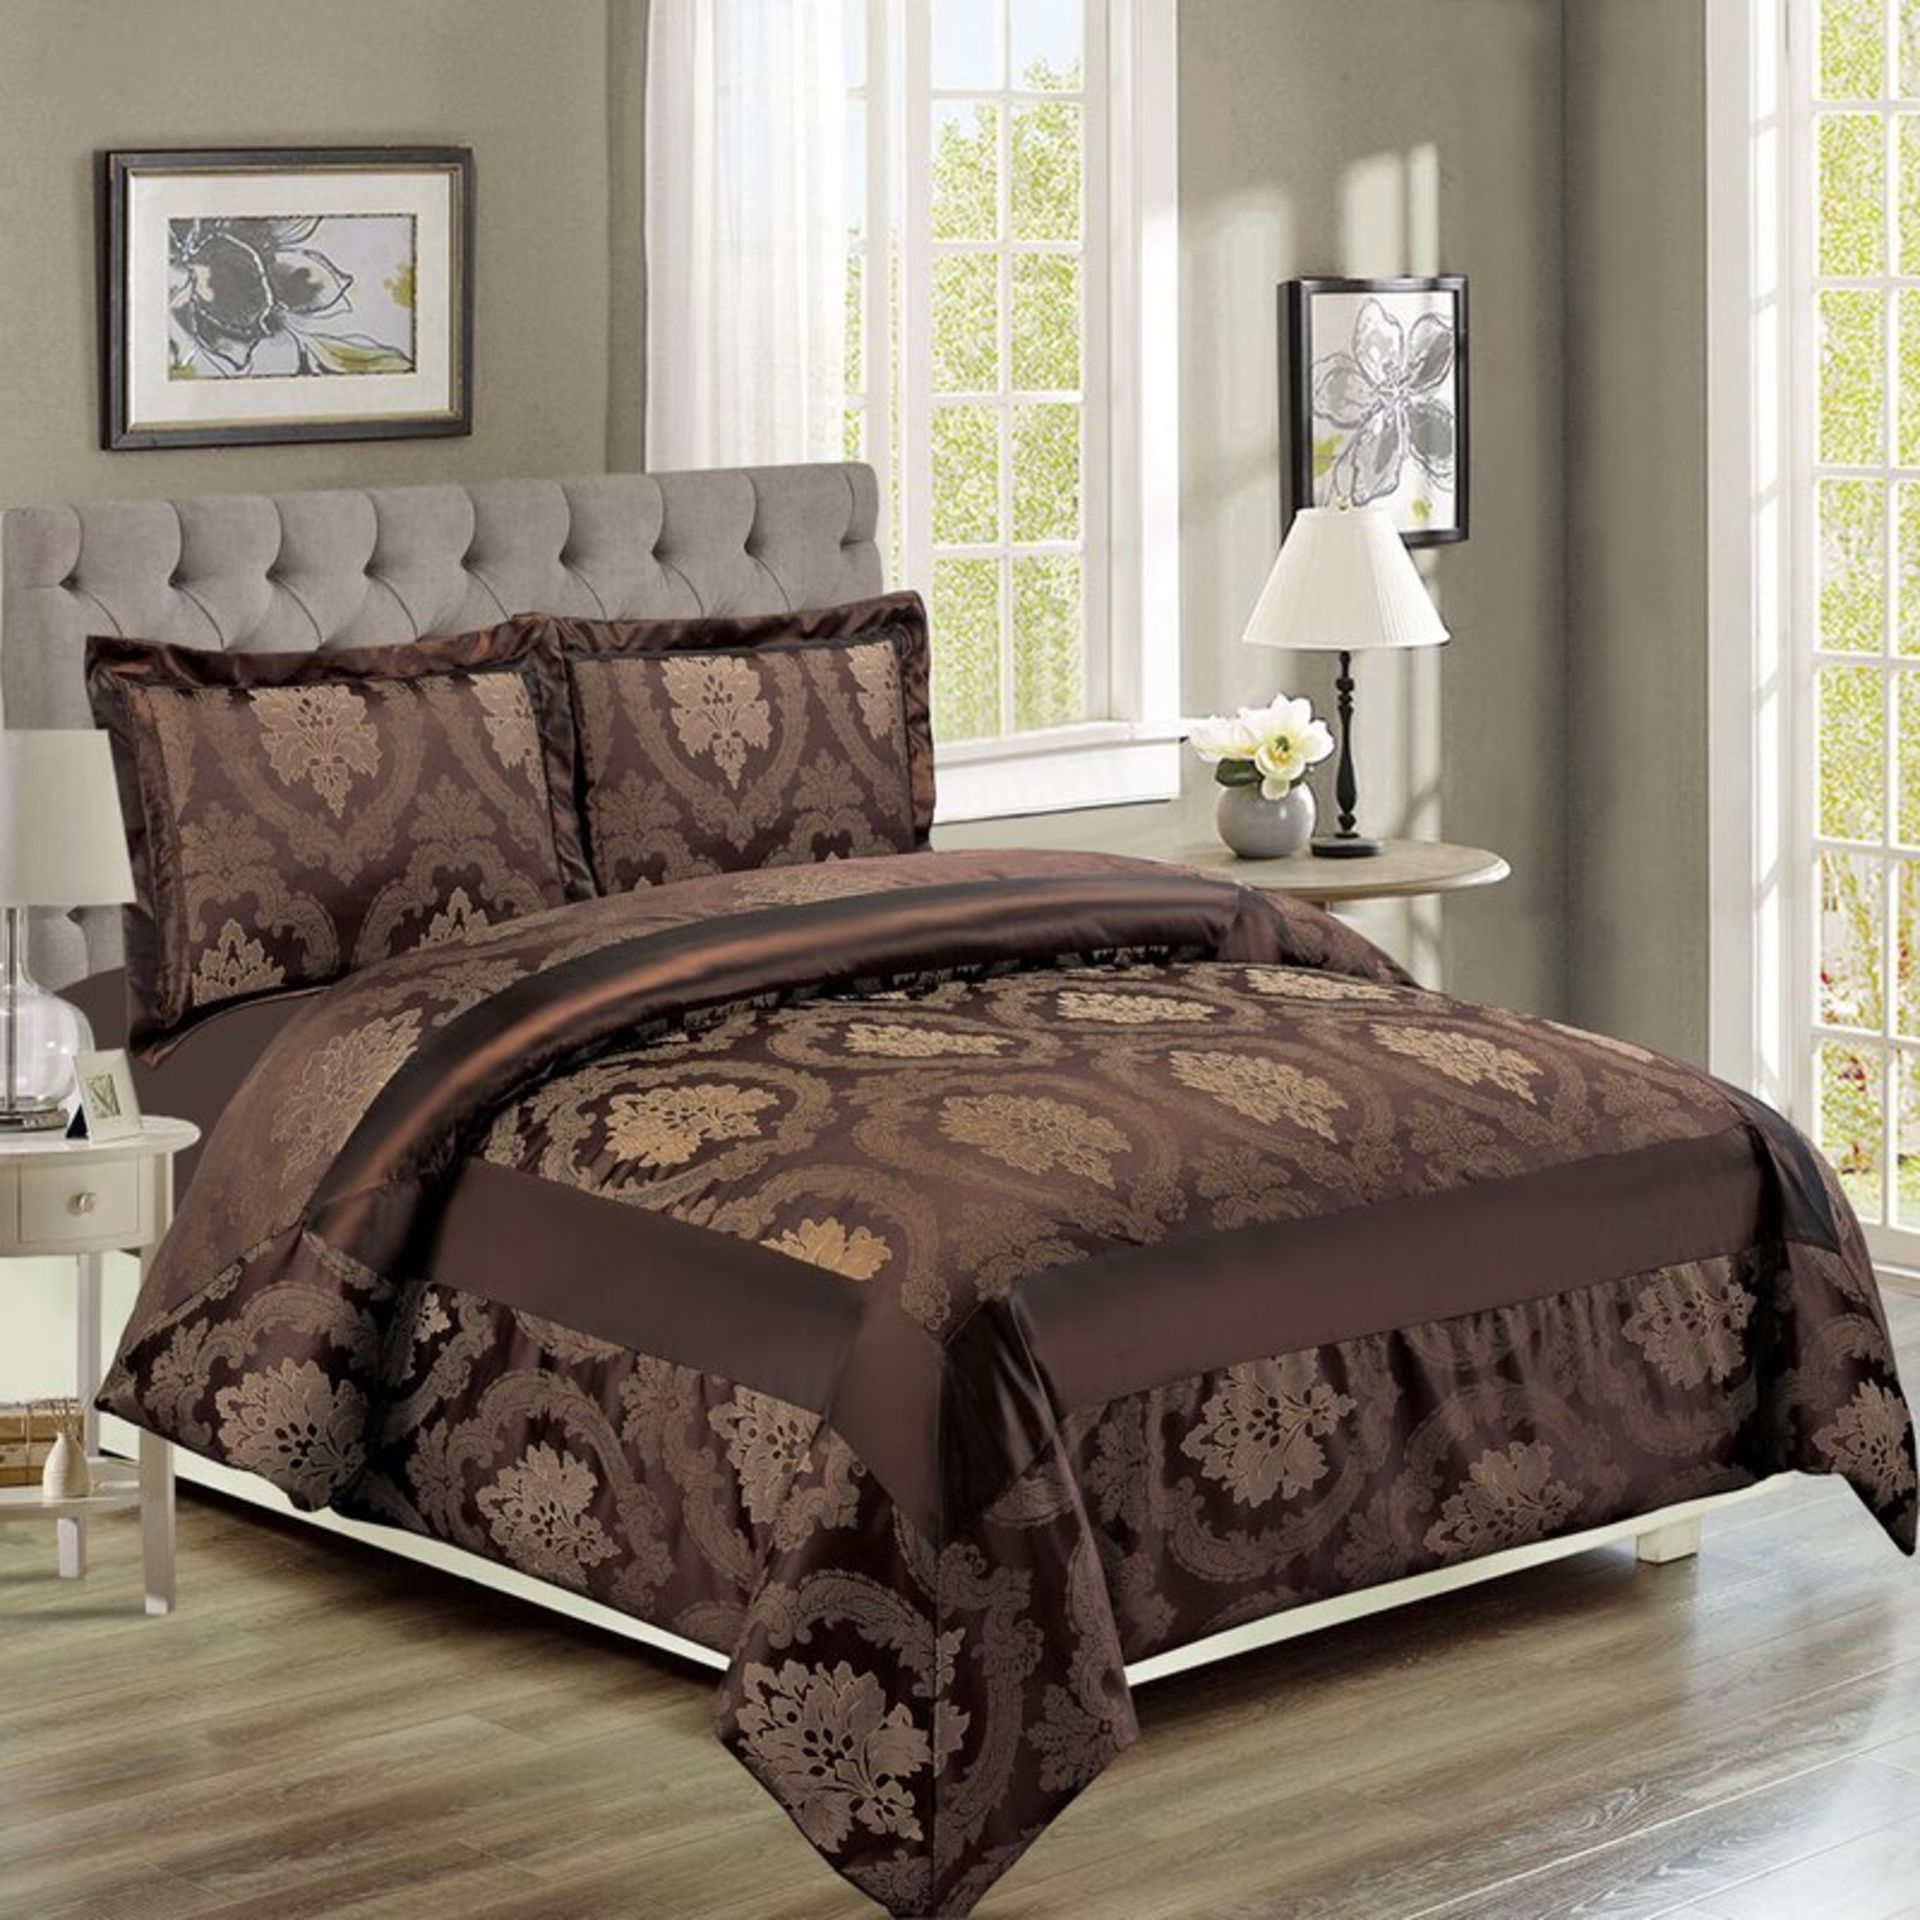 Beamond Bedspread Set with 2 Pillowcases by Astoria Grand - Superking